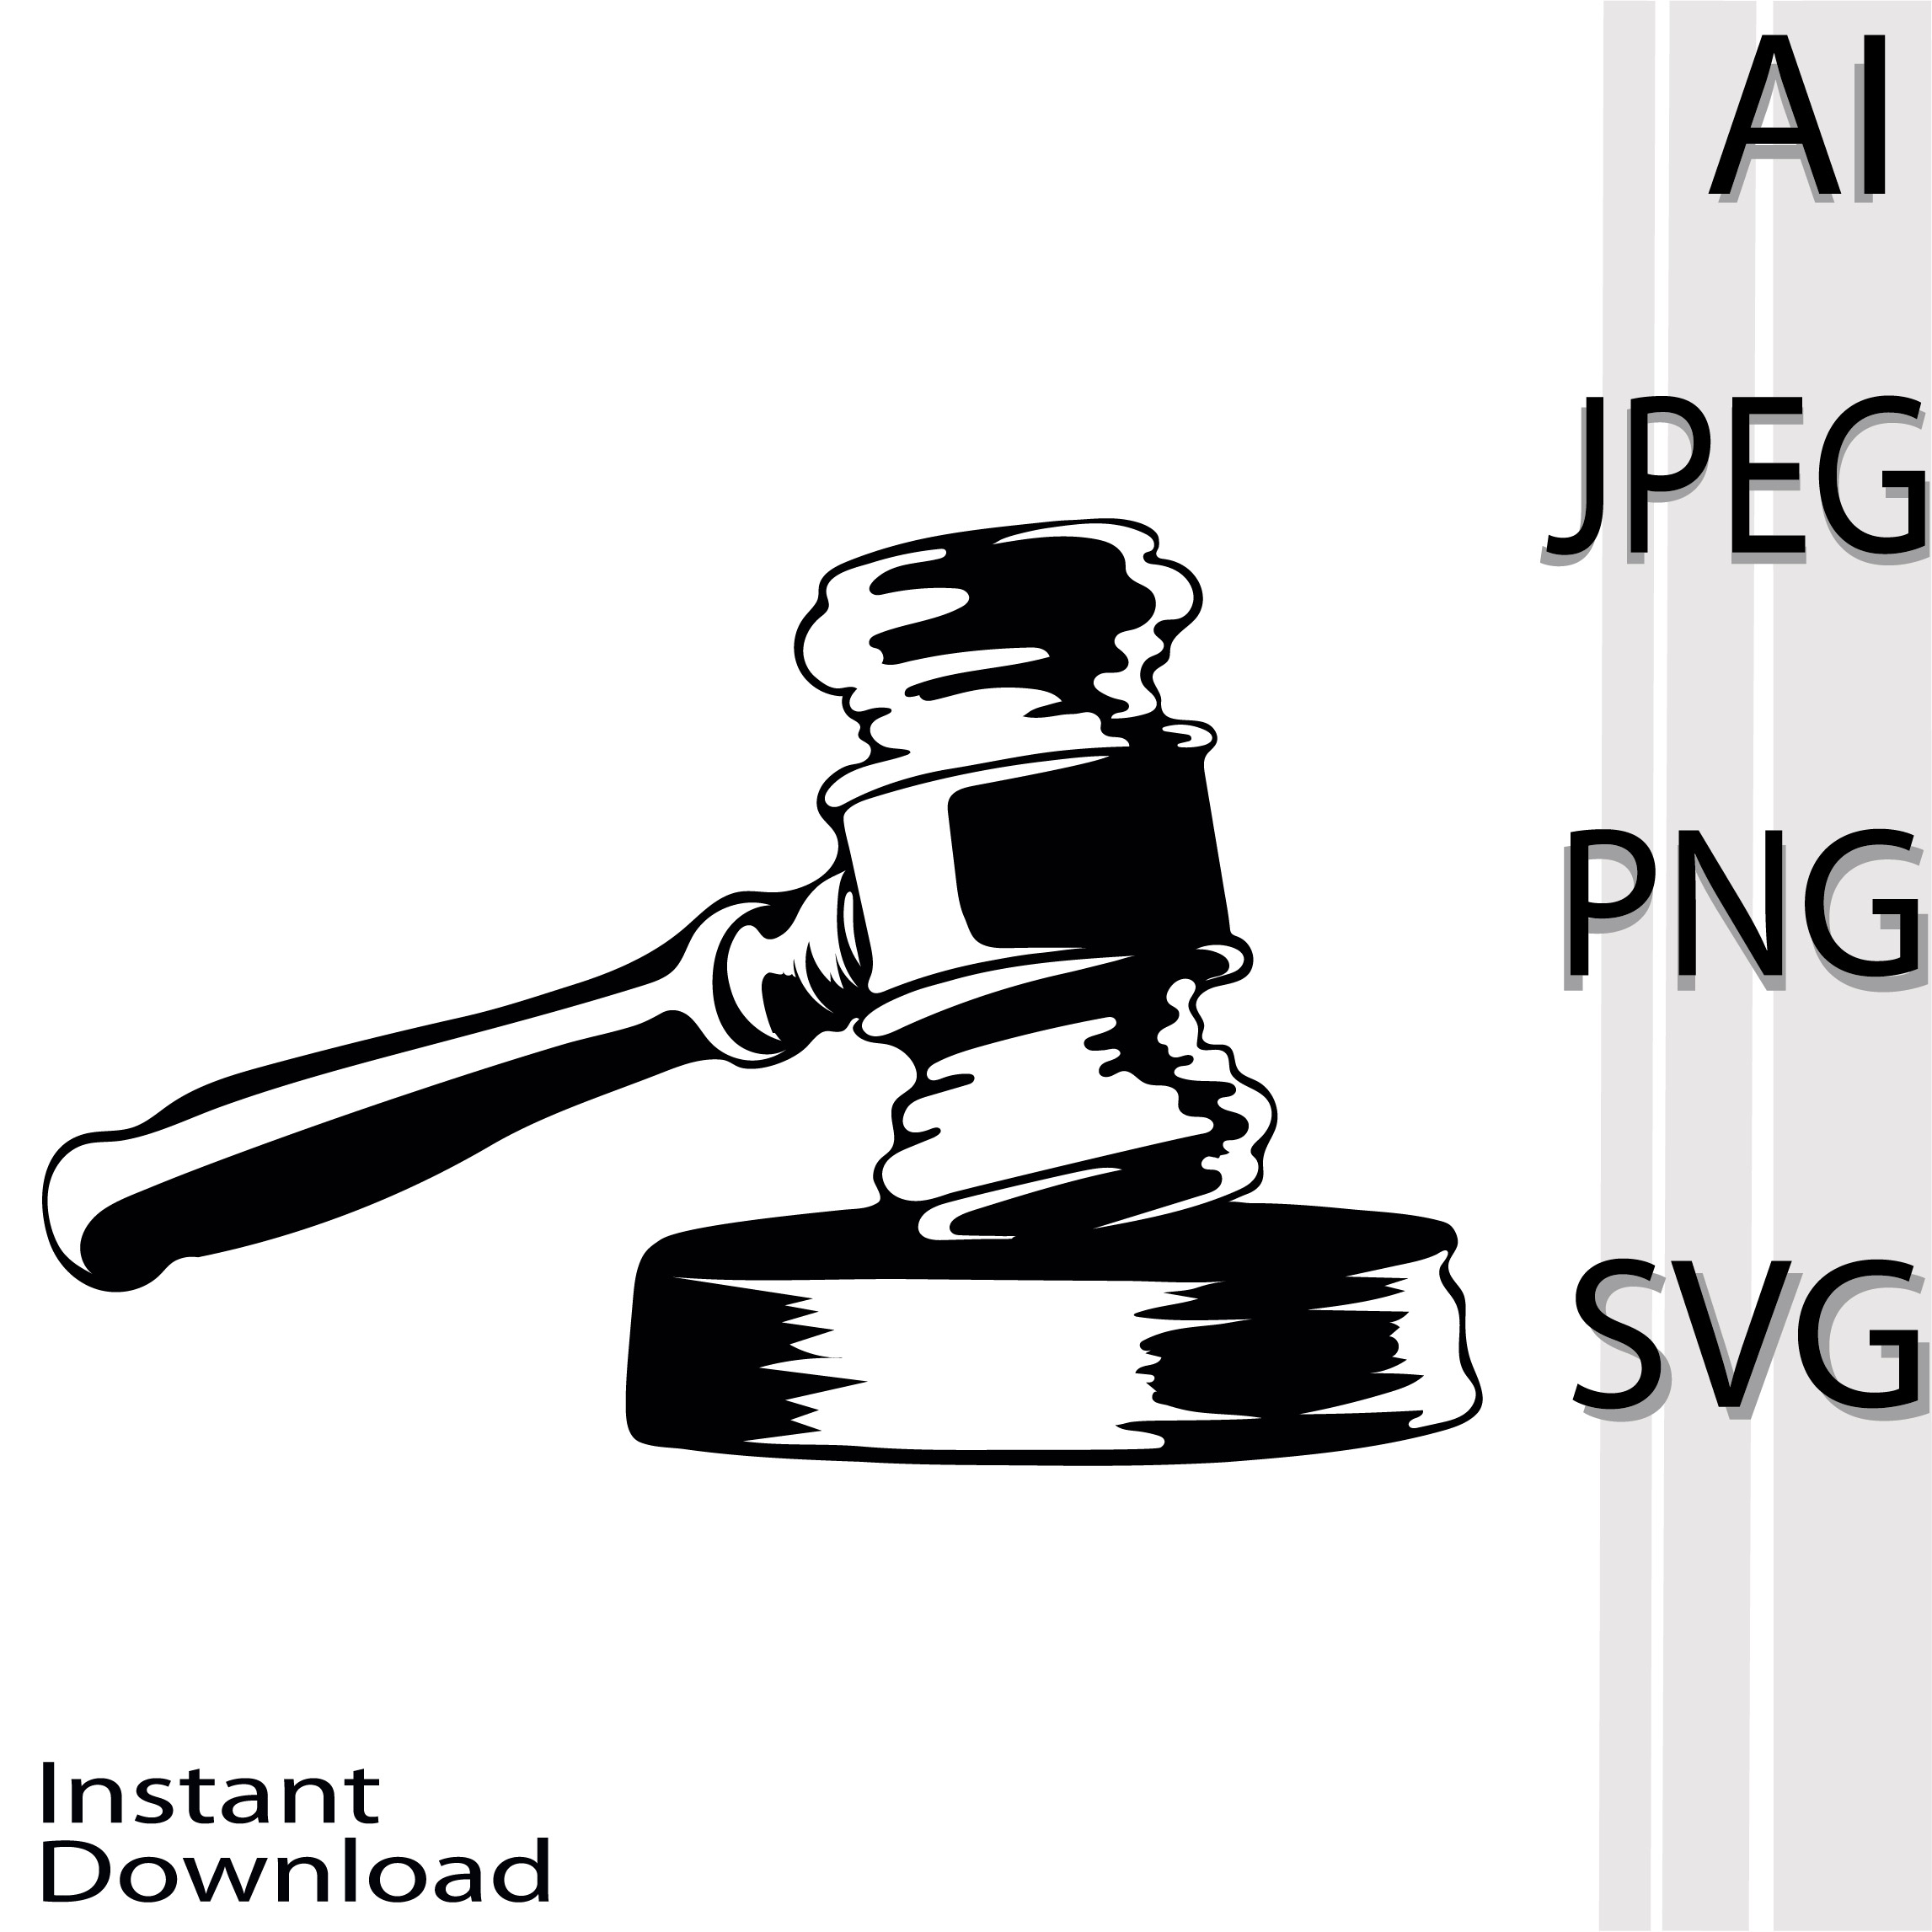 Judge's Gavel SVG cover image.